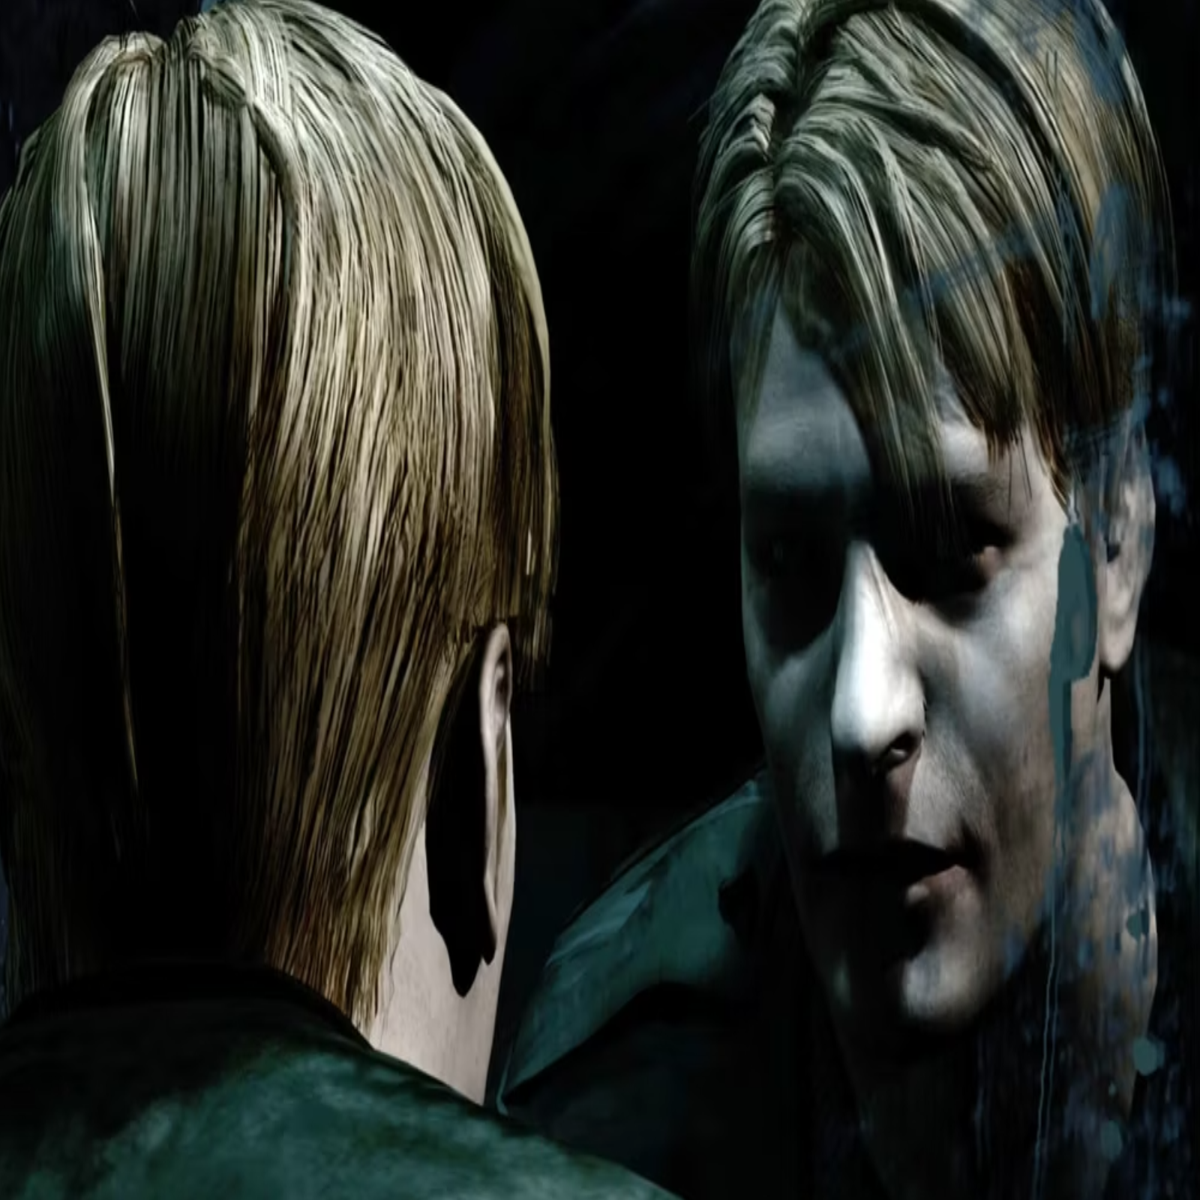 Bloober Team Says Silent Hill 2 PS5 Is Progressing Smoothly